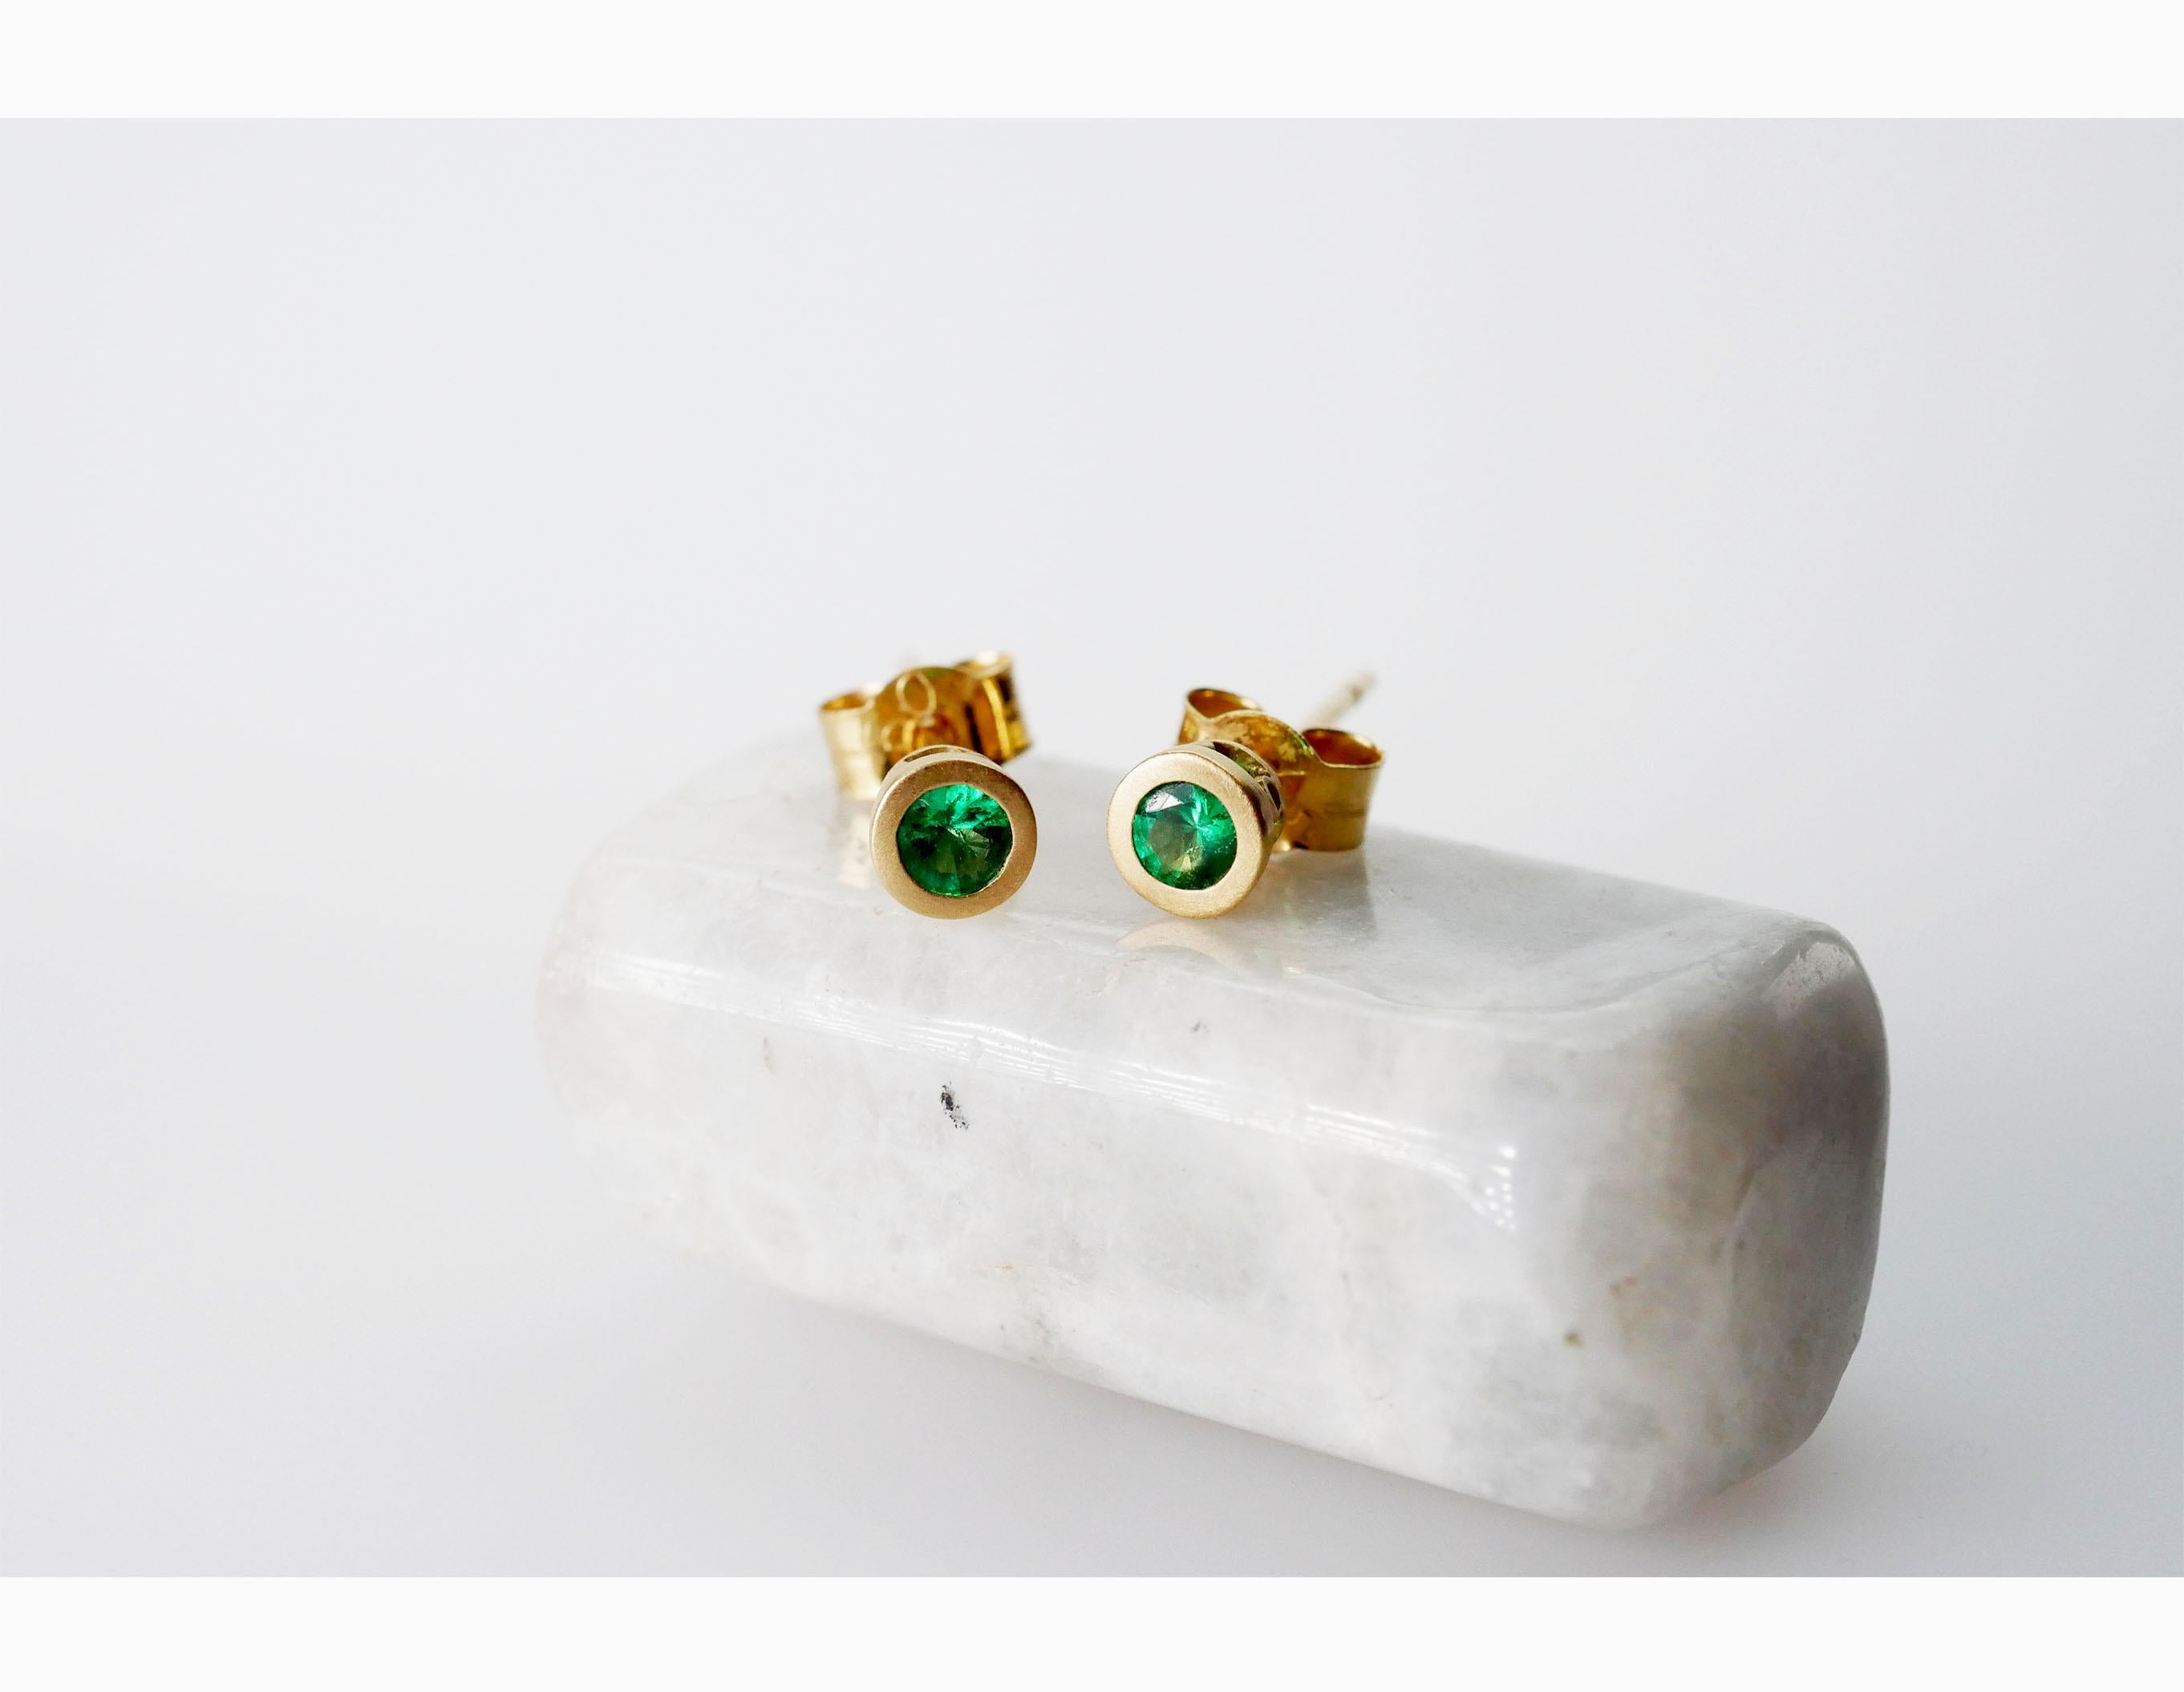 Delicate bright green round emeralds stud earrings in 18k yellow gold. These earrings are set in a smooth bezel setting with a matt finish and decorative pattern that lets the light shine through the emeralds. Wear solo or stacked with other colour